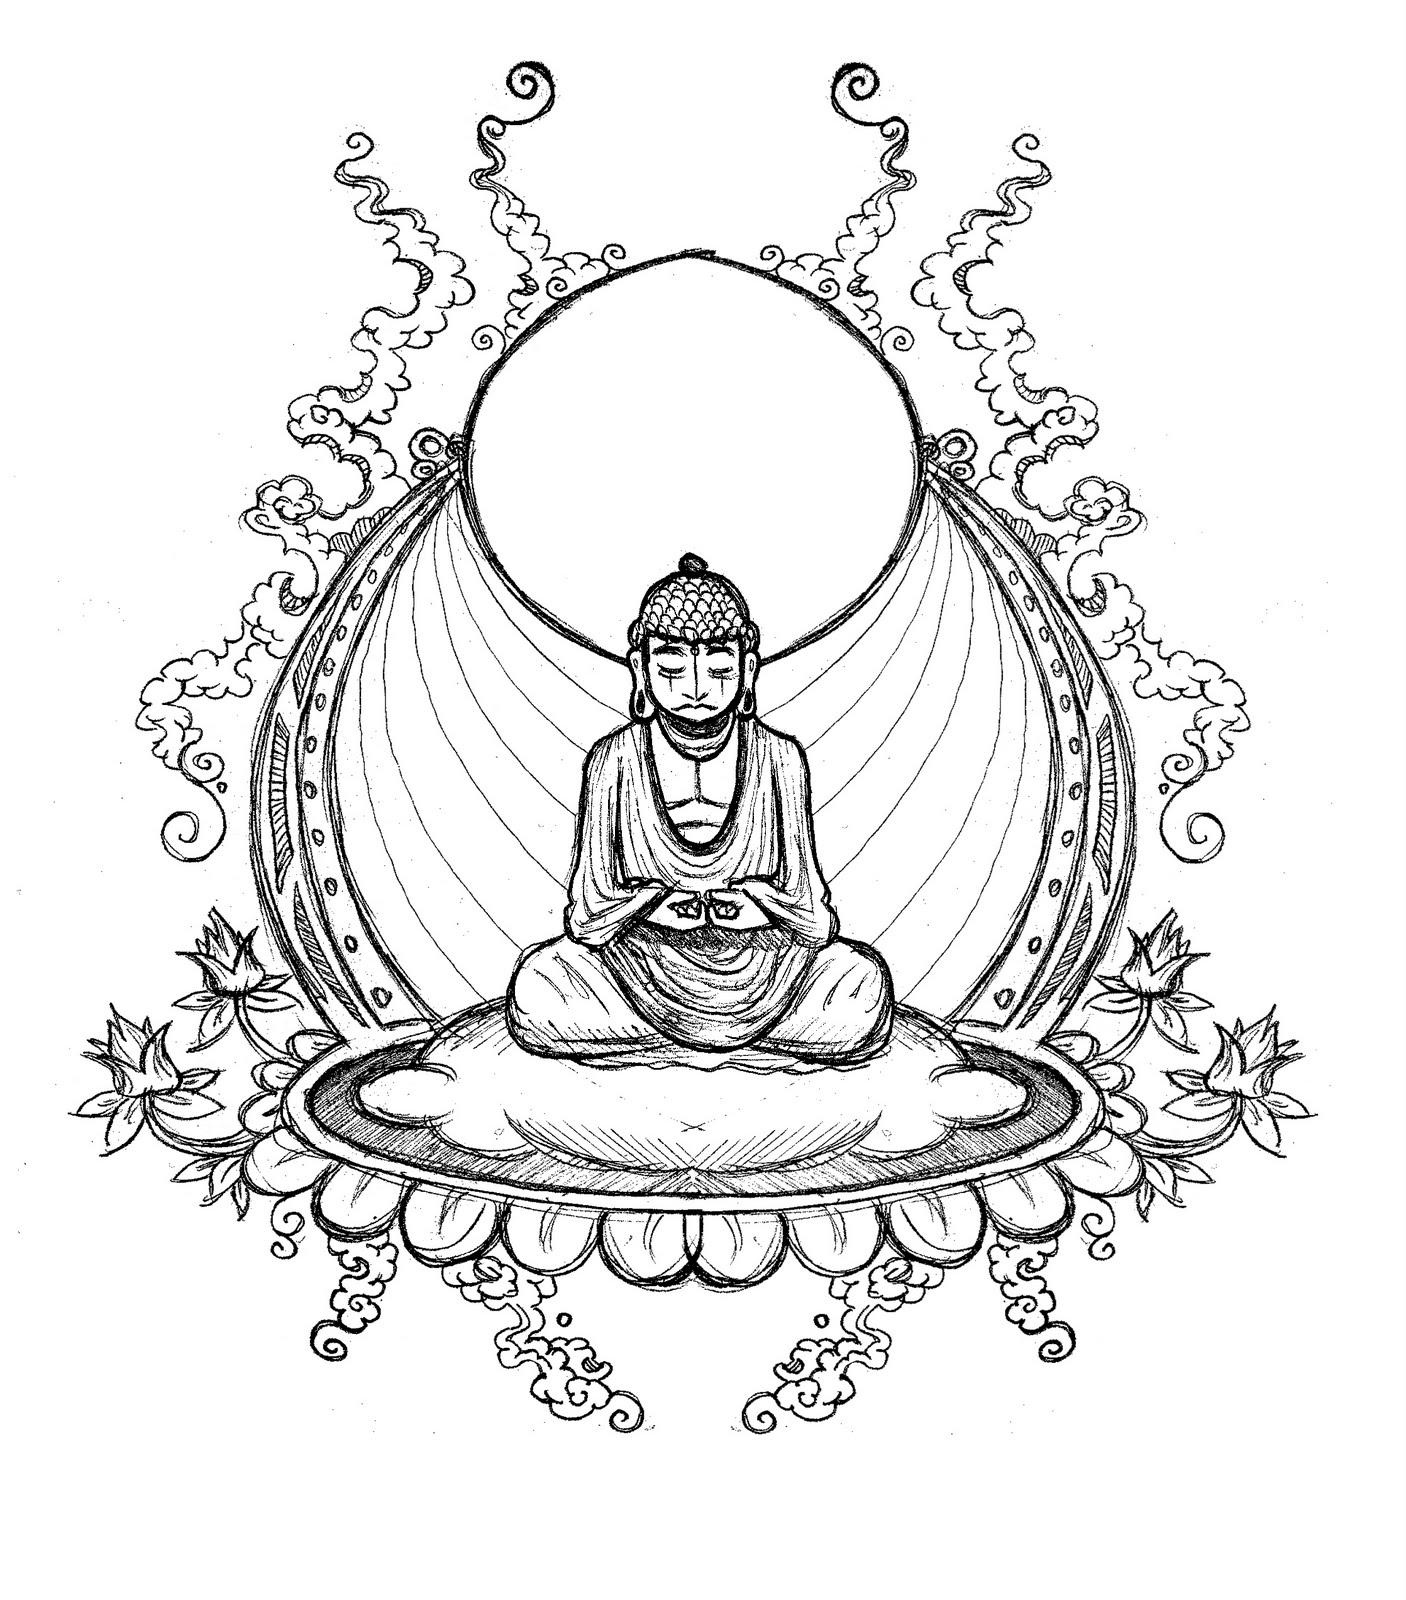 Buddha Line Drawing - ClipArt Best - ClipArt Best